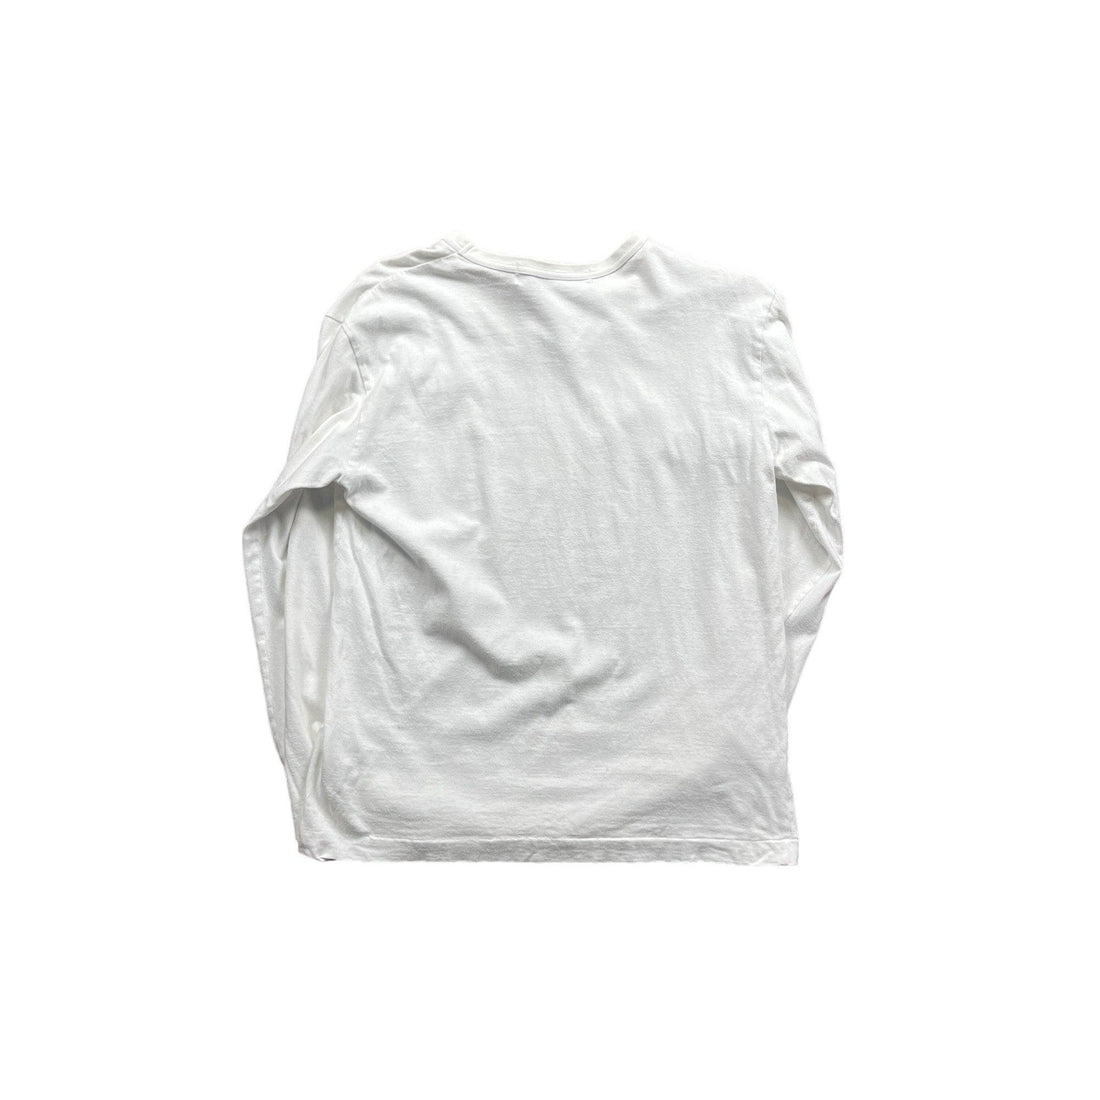 White Comme Des Garcons (CDG) Long Sleeve Tee - Large (Recommended Size - Medium) - The Streetwear Studio